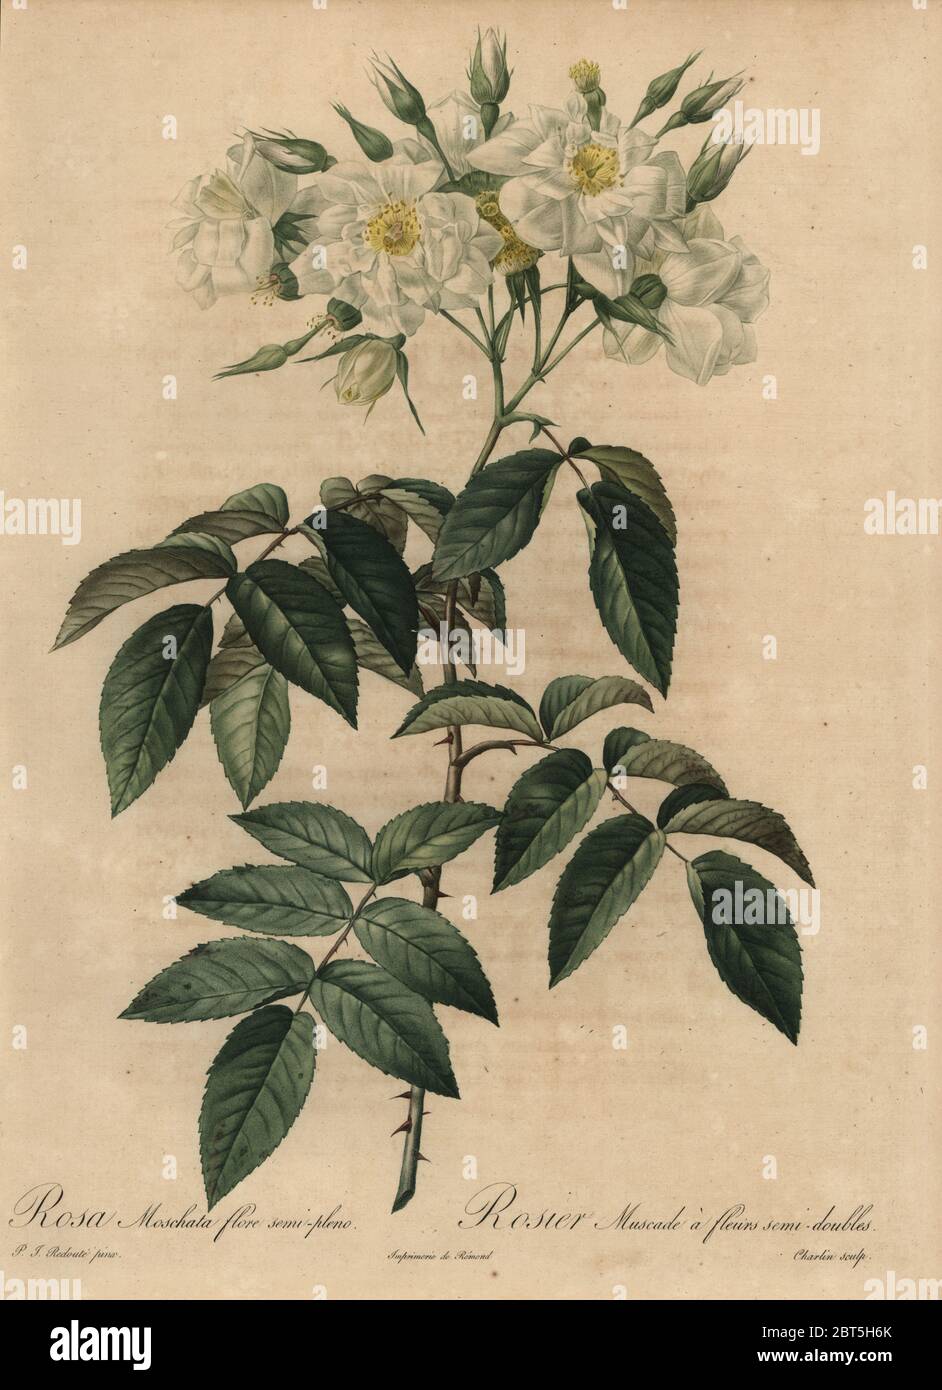 White musk rose, Rosa moschata flore semi-pleno, Rosier Muscade a fleurs semi-doubles. Stipple copperplate engraving by Jean Louis Auguste Charlin handcoloured a la poupee after a botanical illustration by Pierre-Joseph Redoute from the first folio edition of Les Roses, Firmin Didot, Paris, 1817. Stock Photo